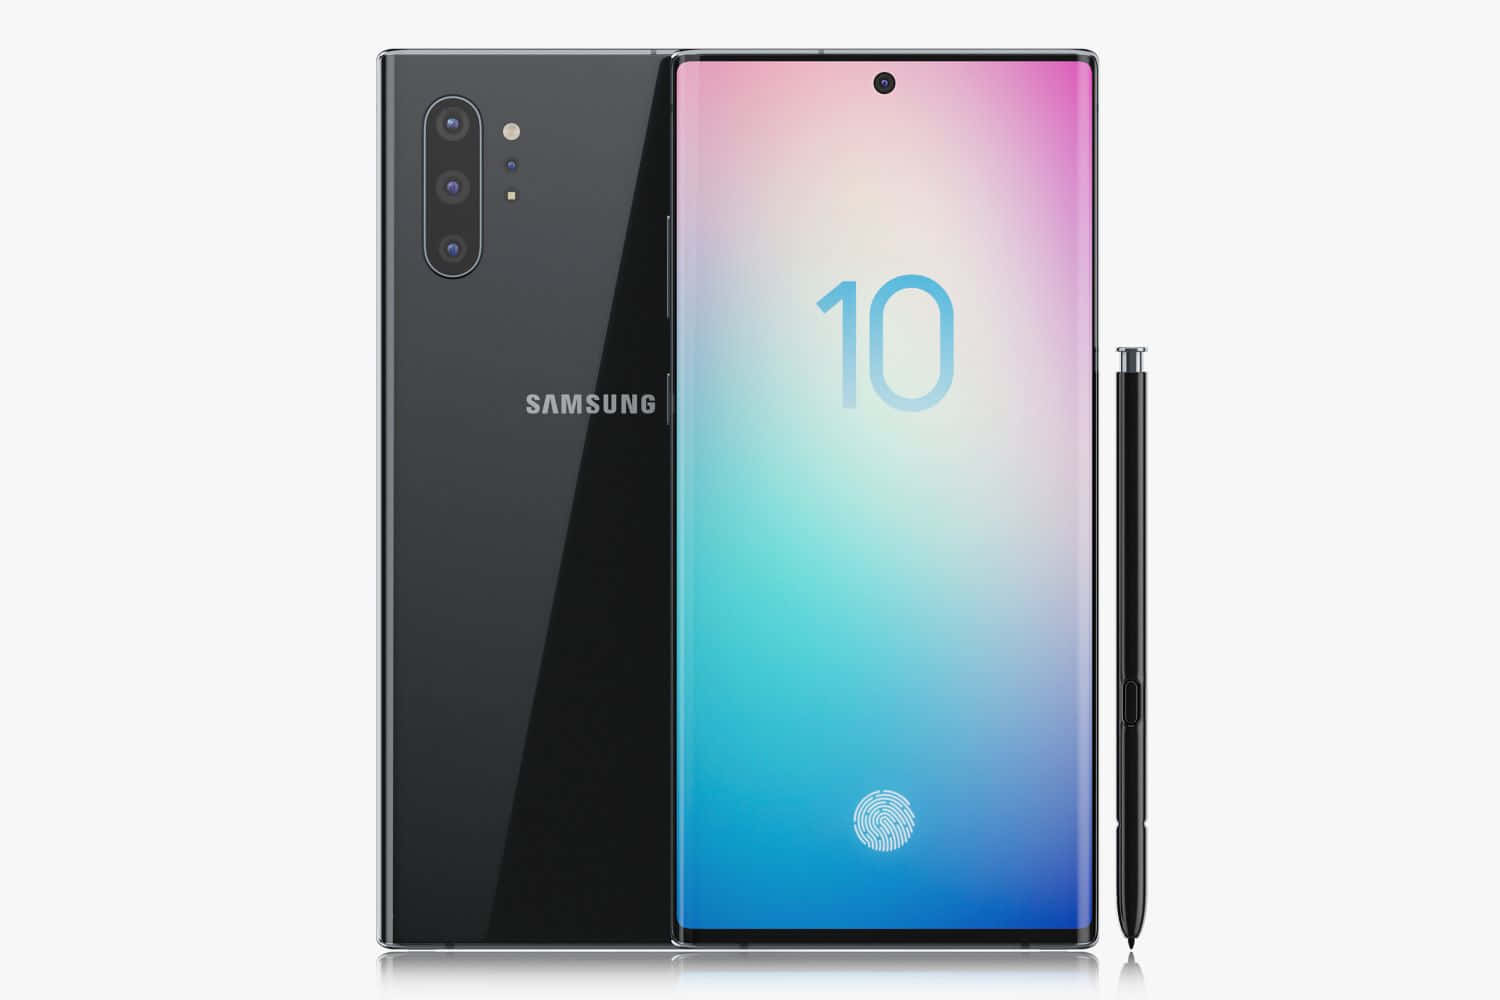 Get Ready for the Future with the Samsung Galaxy Note 10